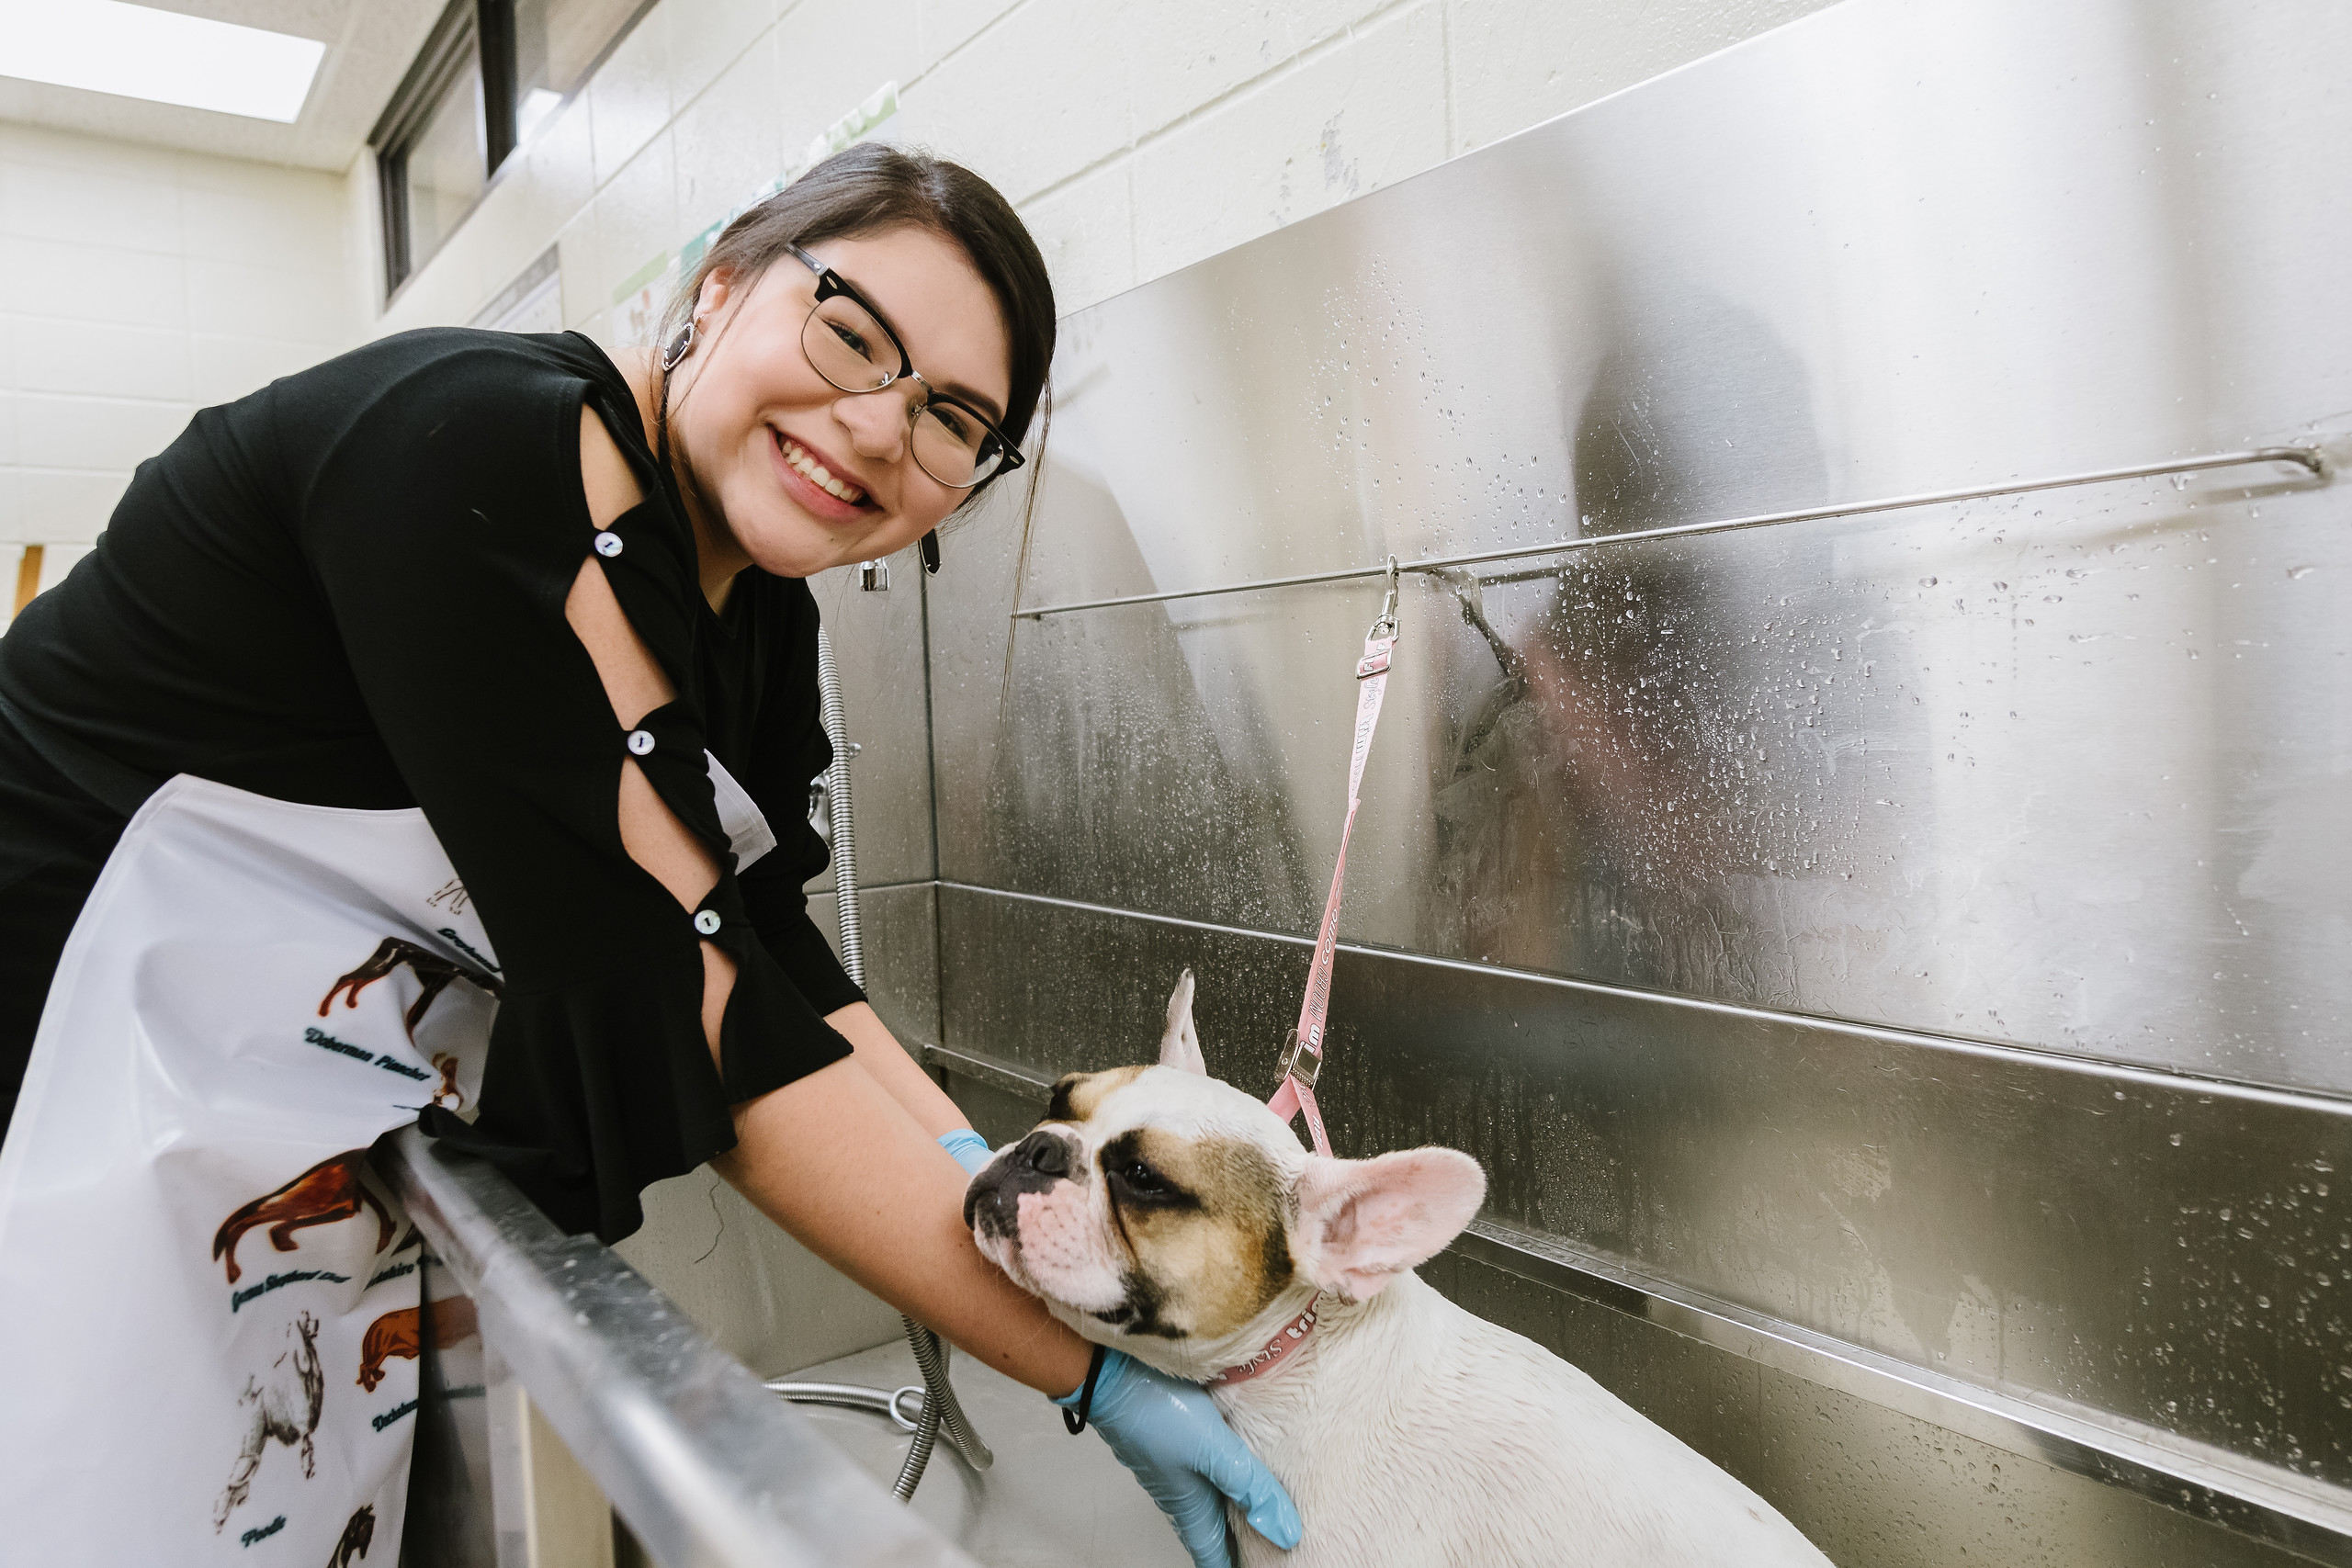 Pampered Pooches will provide hands-on learning for pre-veterinary students 